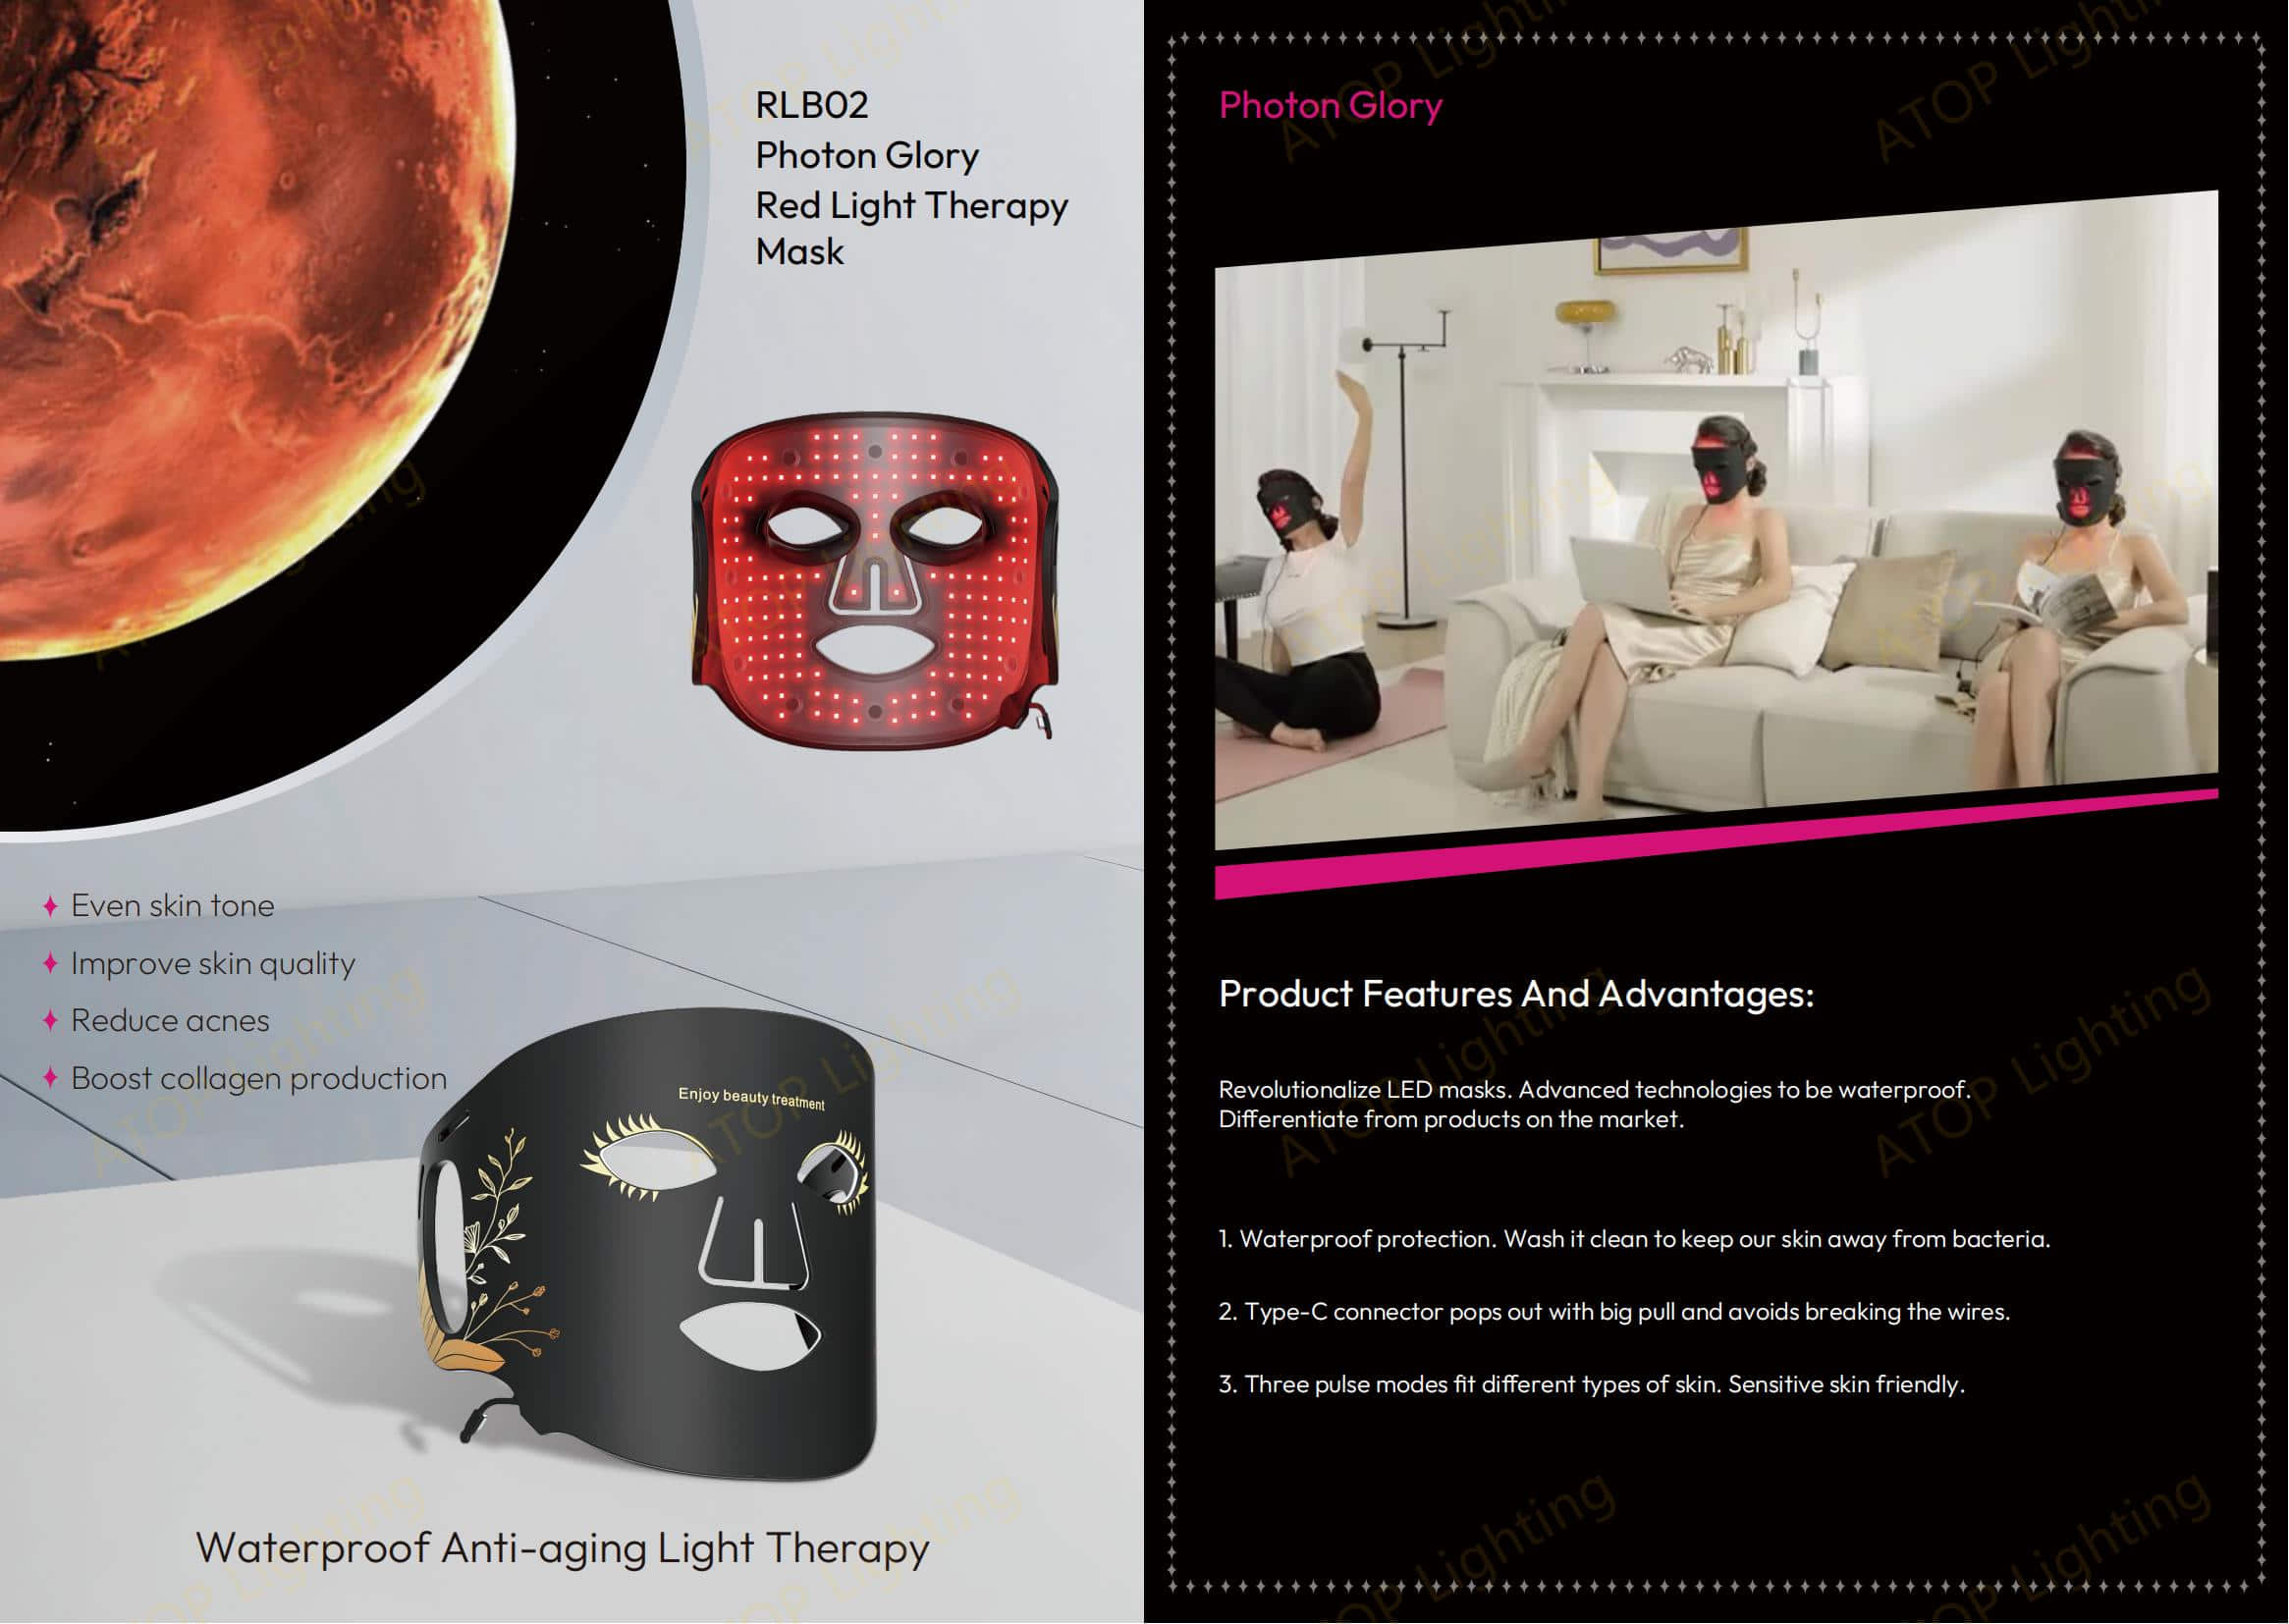 RLB02 Photon Glory Red Light Therapy Mask